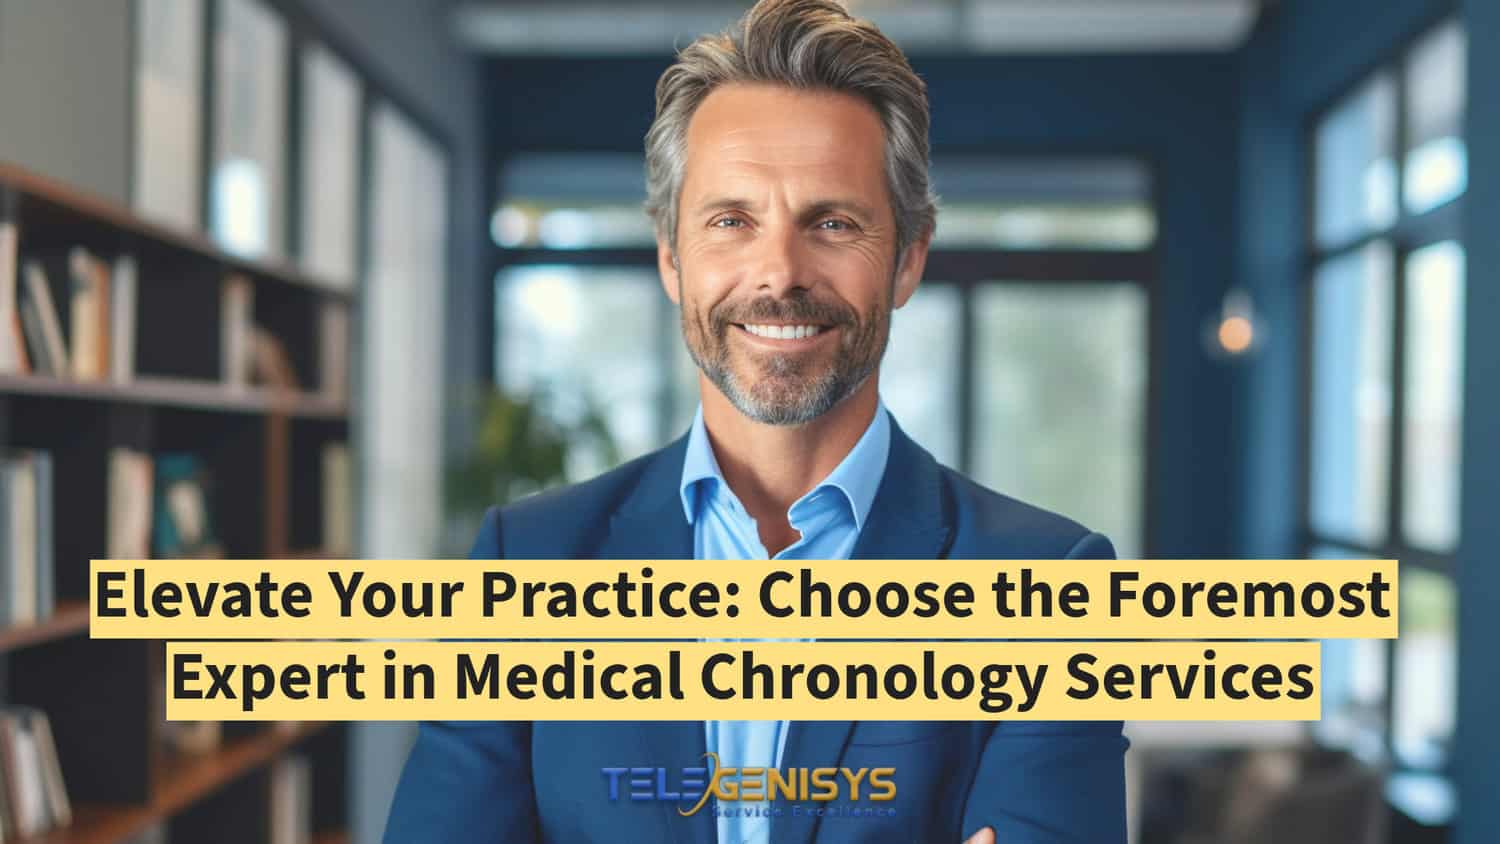 Elevate Your Practice: Choose the Foremost Expert in Medical Chronology Services - Telegenisys Inc.